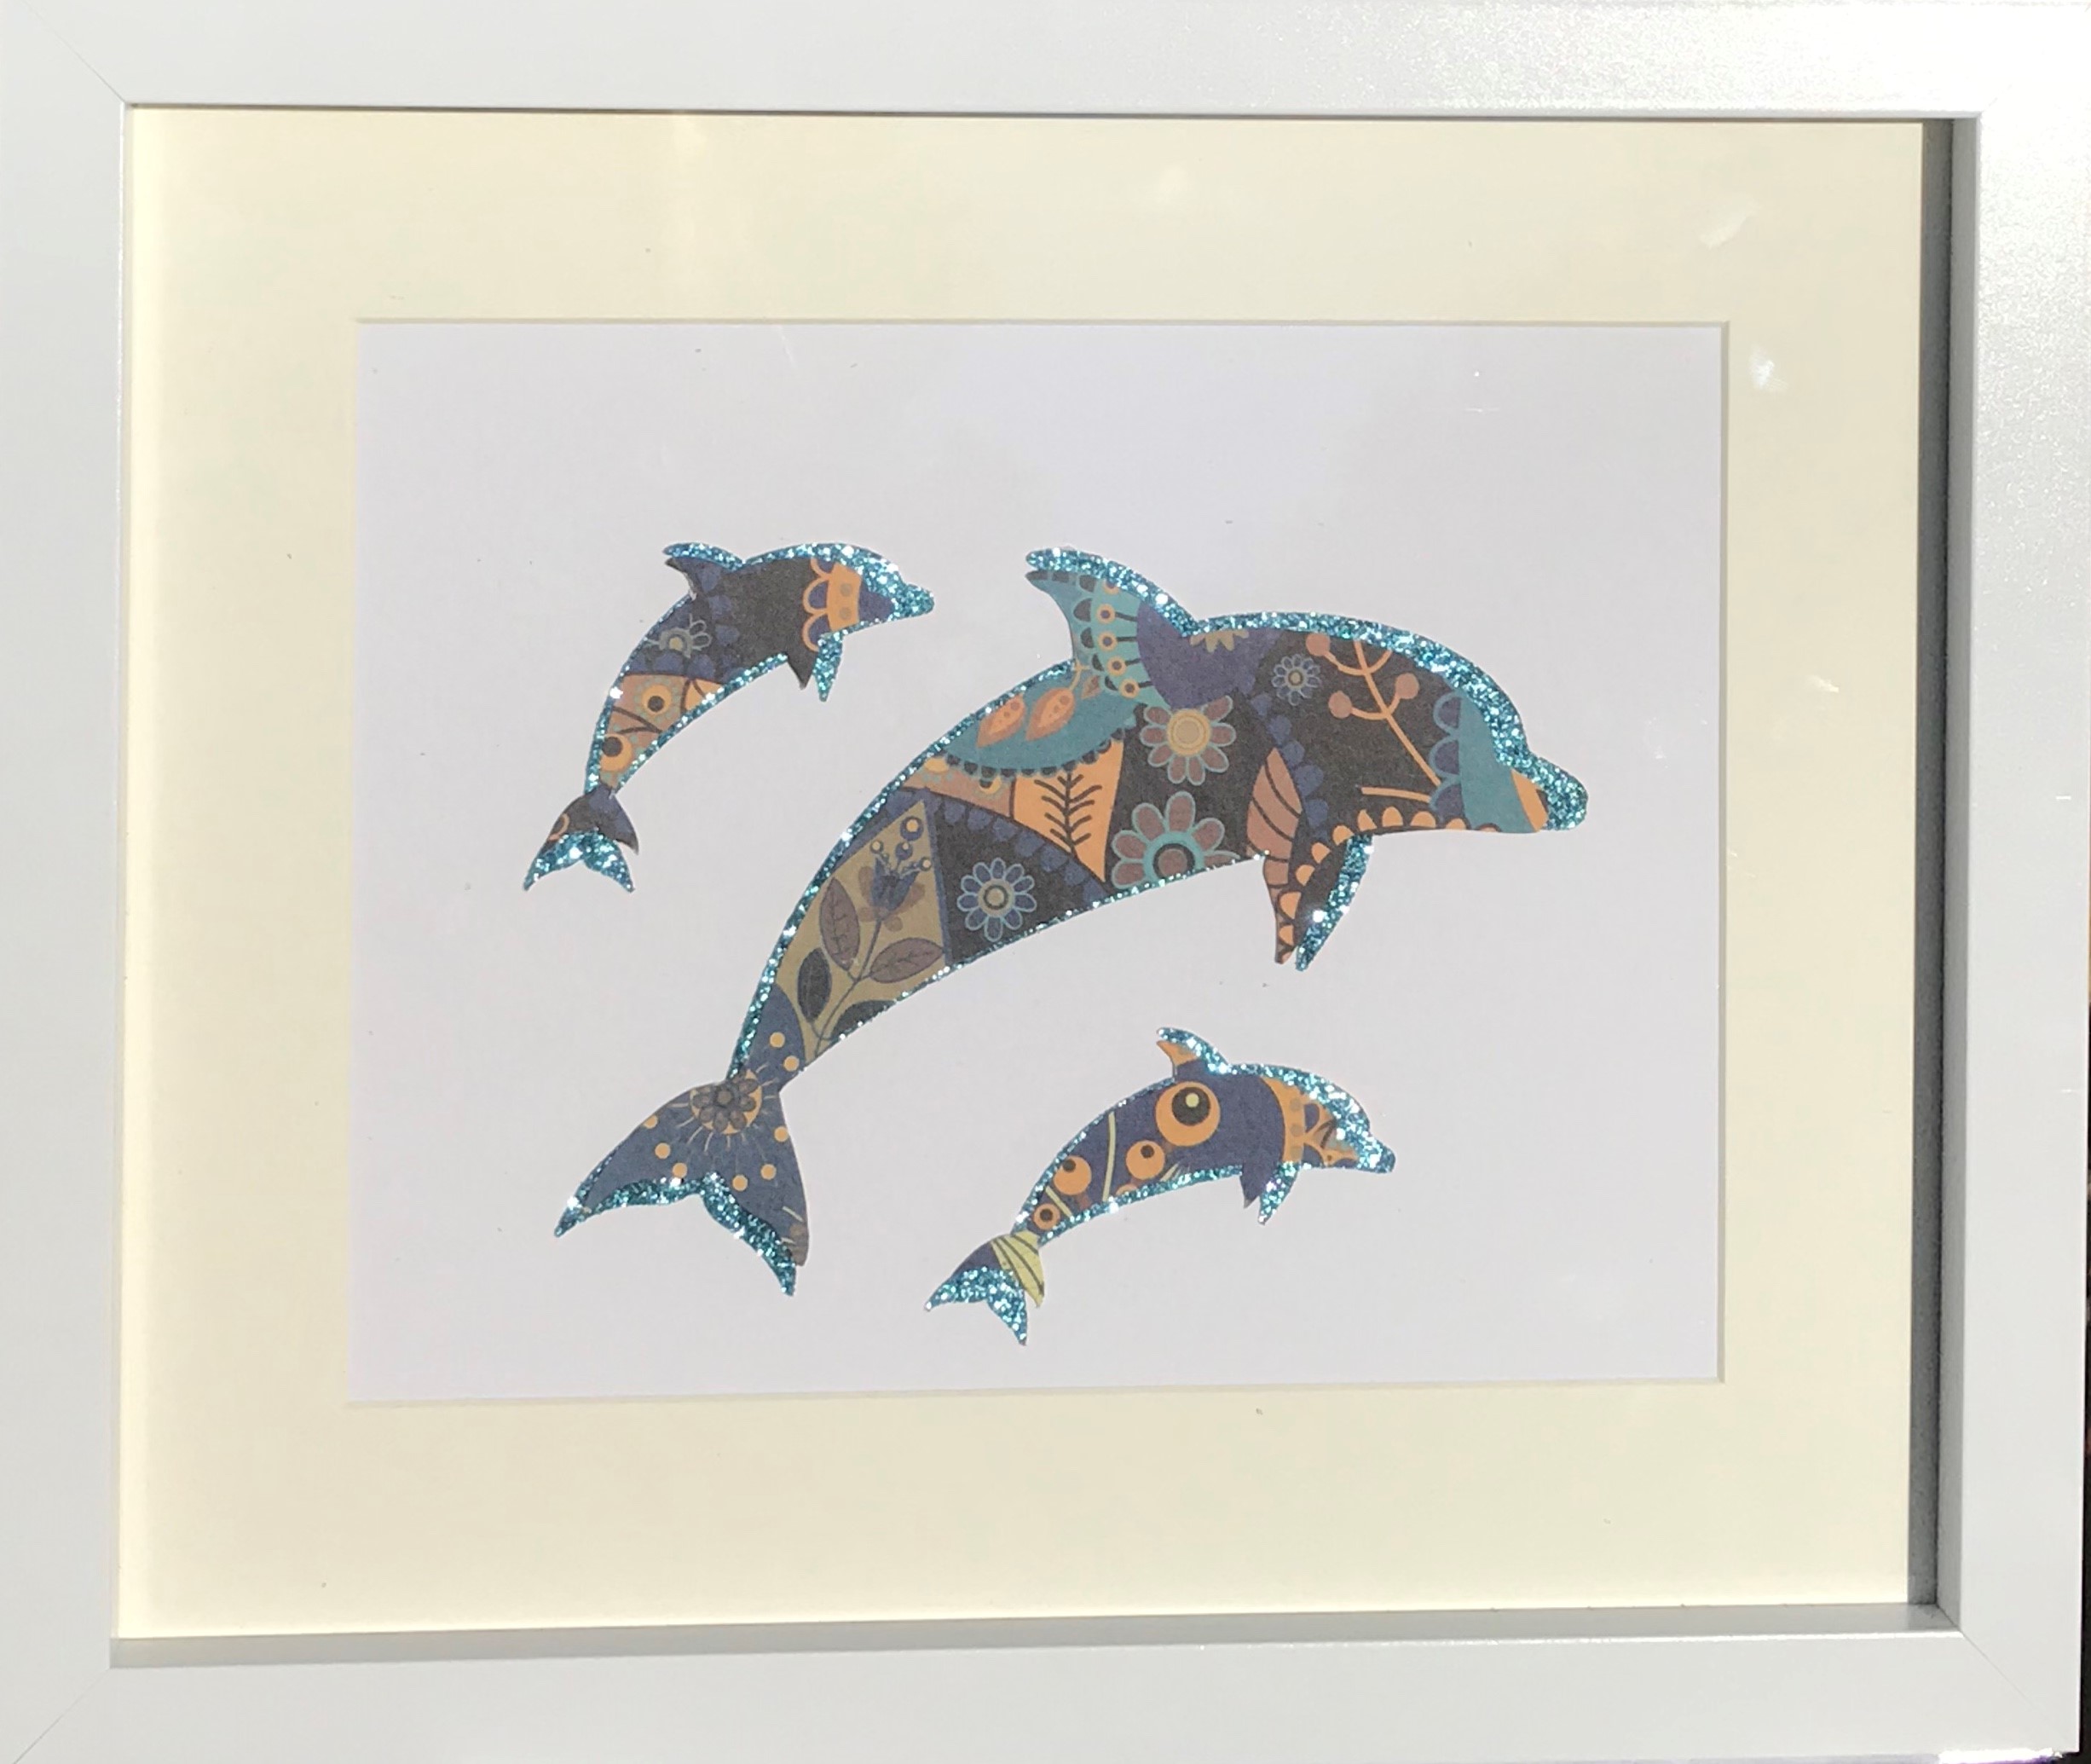 The 3 dolphins framed wall art